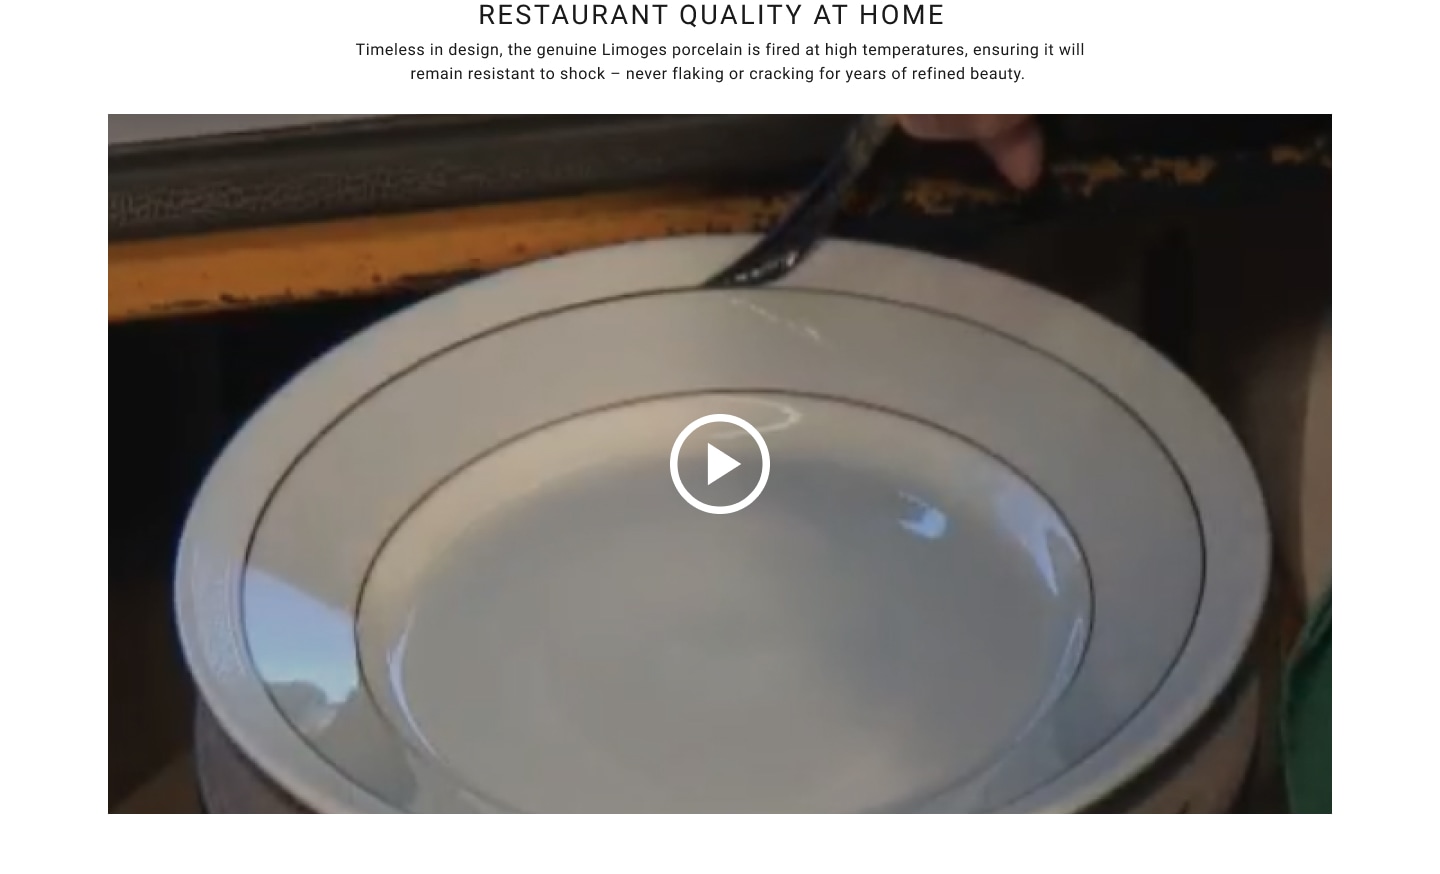 Restaurant Quality at Home